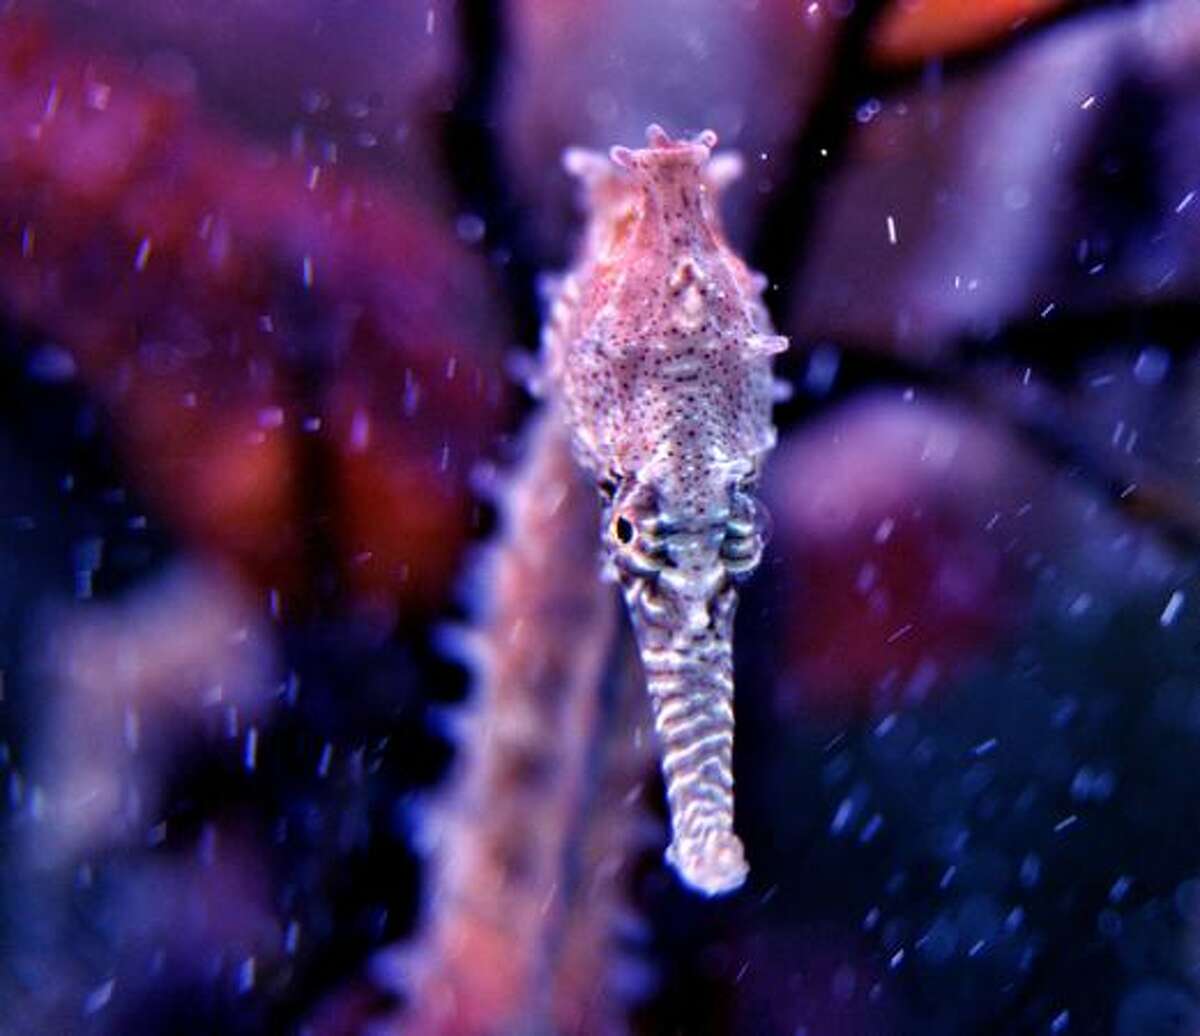 A seahorse, Hippocampus barbouri, is displayed in a tank during the annual Taiwan International Aquarium Expo at the World Trade Center in Taipei on Friday. More then one hundred tanks of fish from nine asian countries will be on display in the four day exhibition. AFP PHOTO / Sam YEH